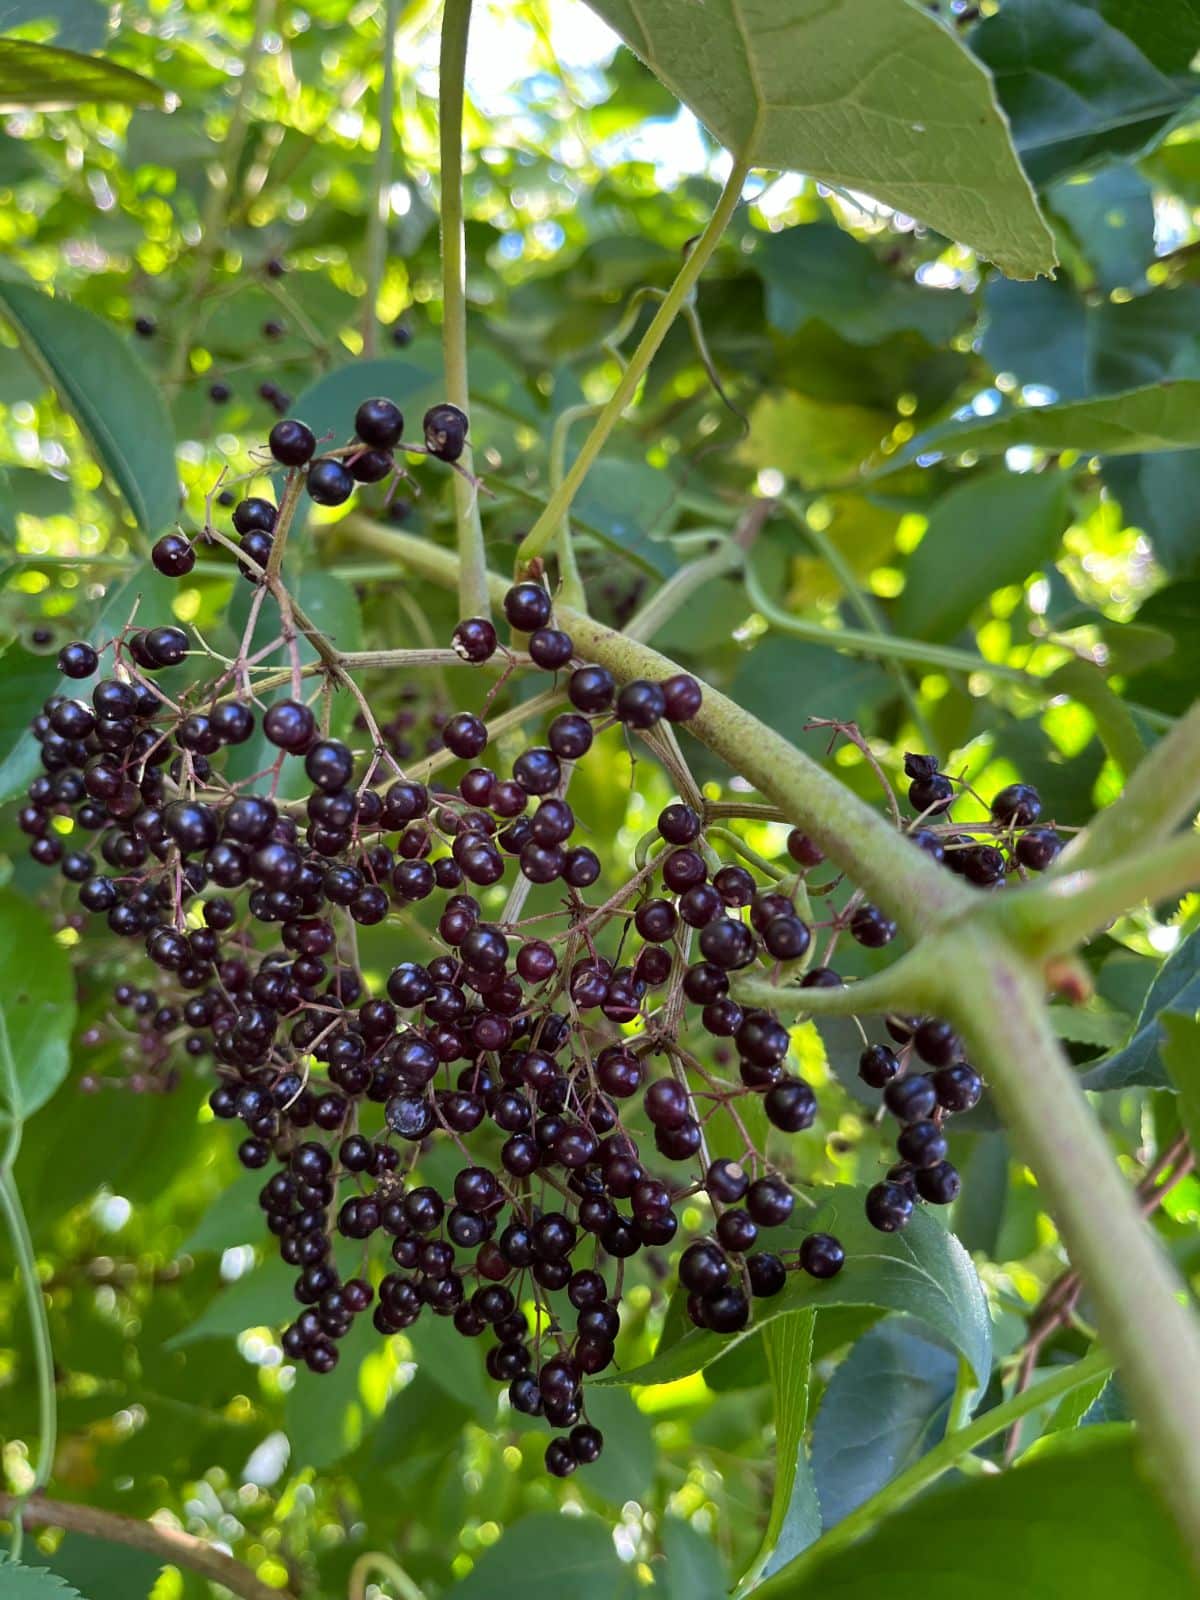 A cluster of lovely dark purple elderberries on a branch of new growth that is perfect for cuttings for propagation